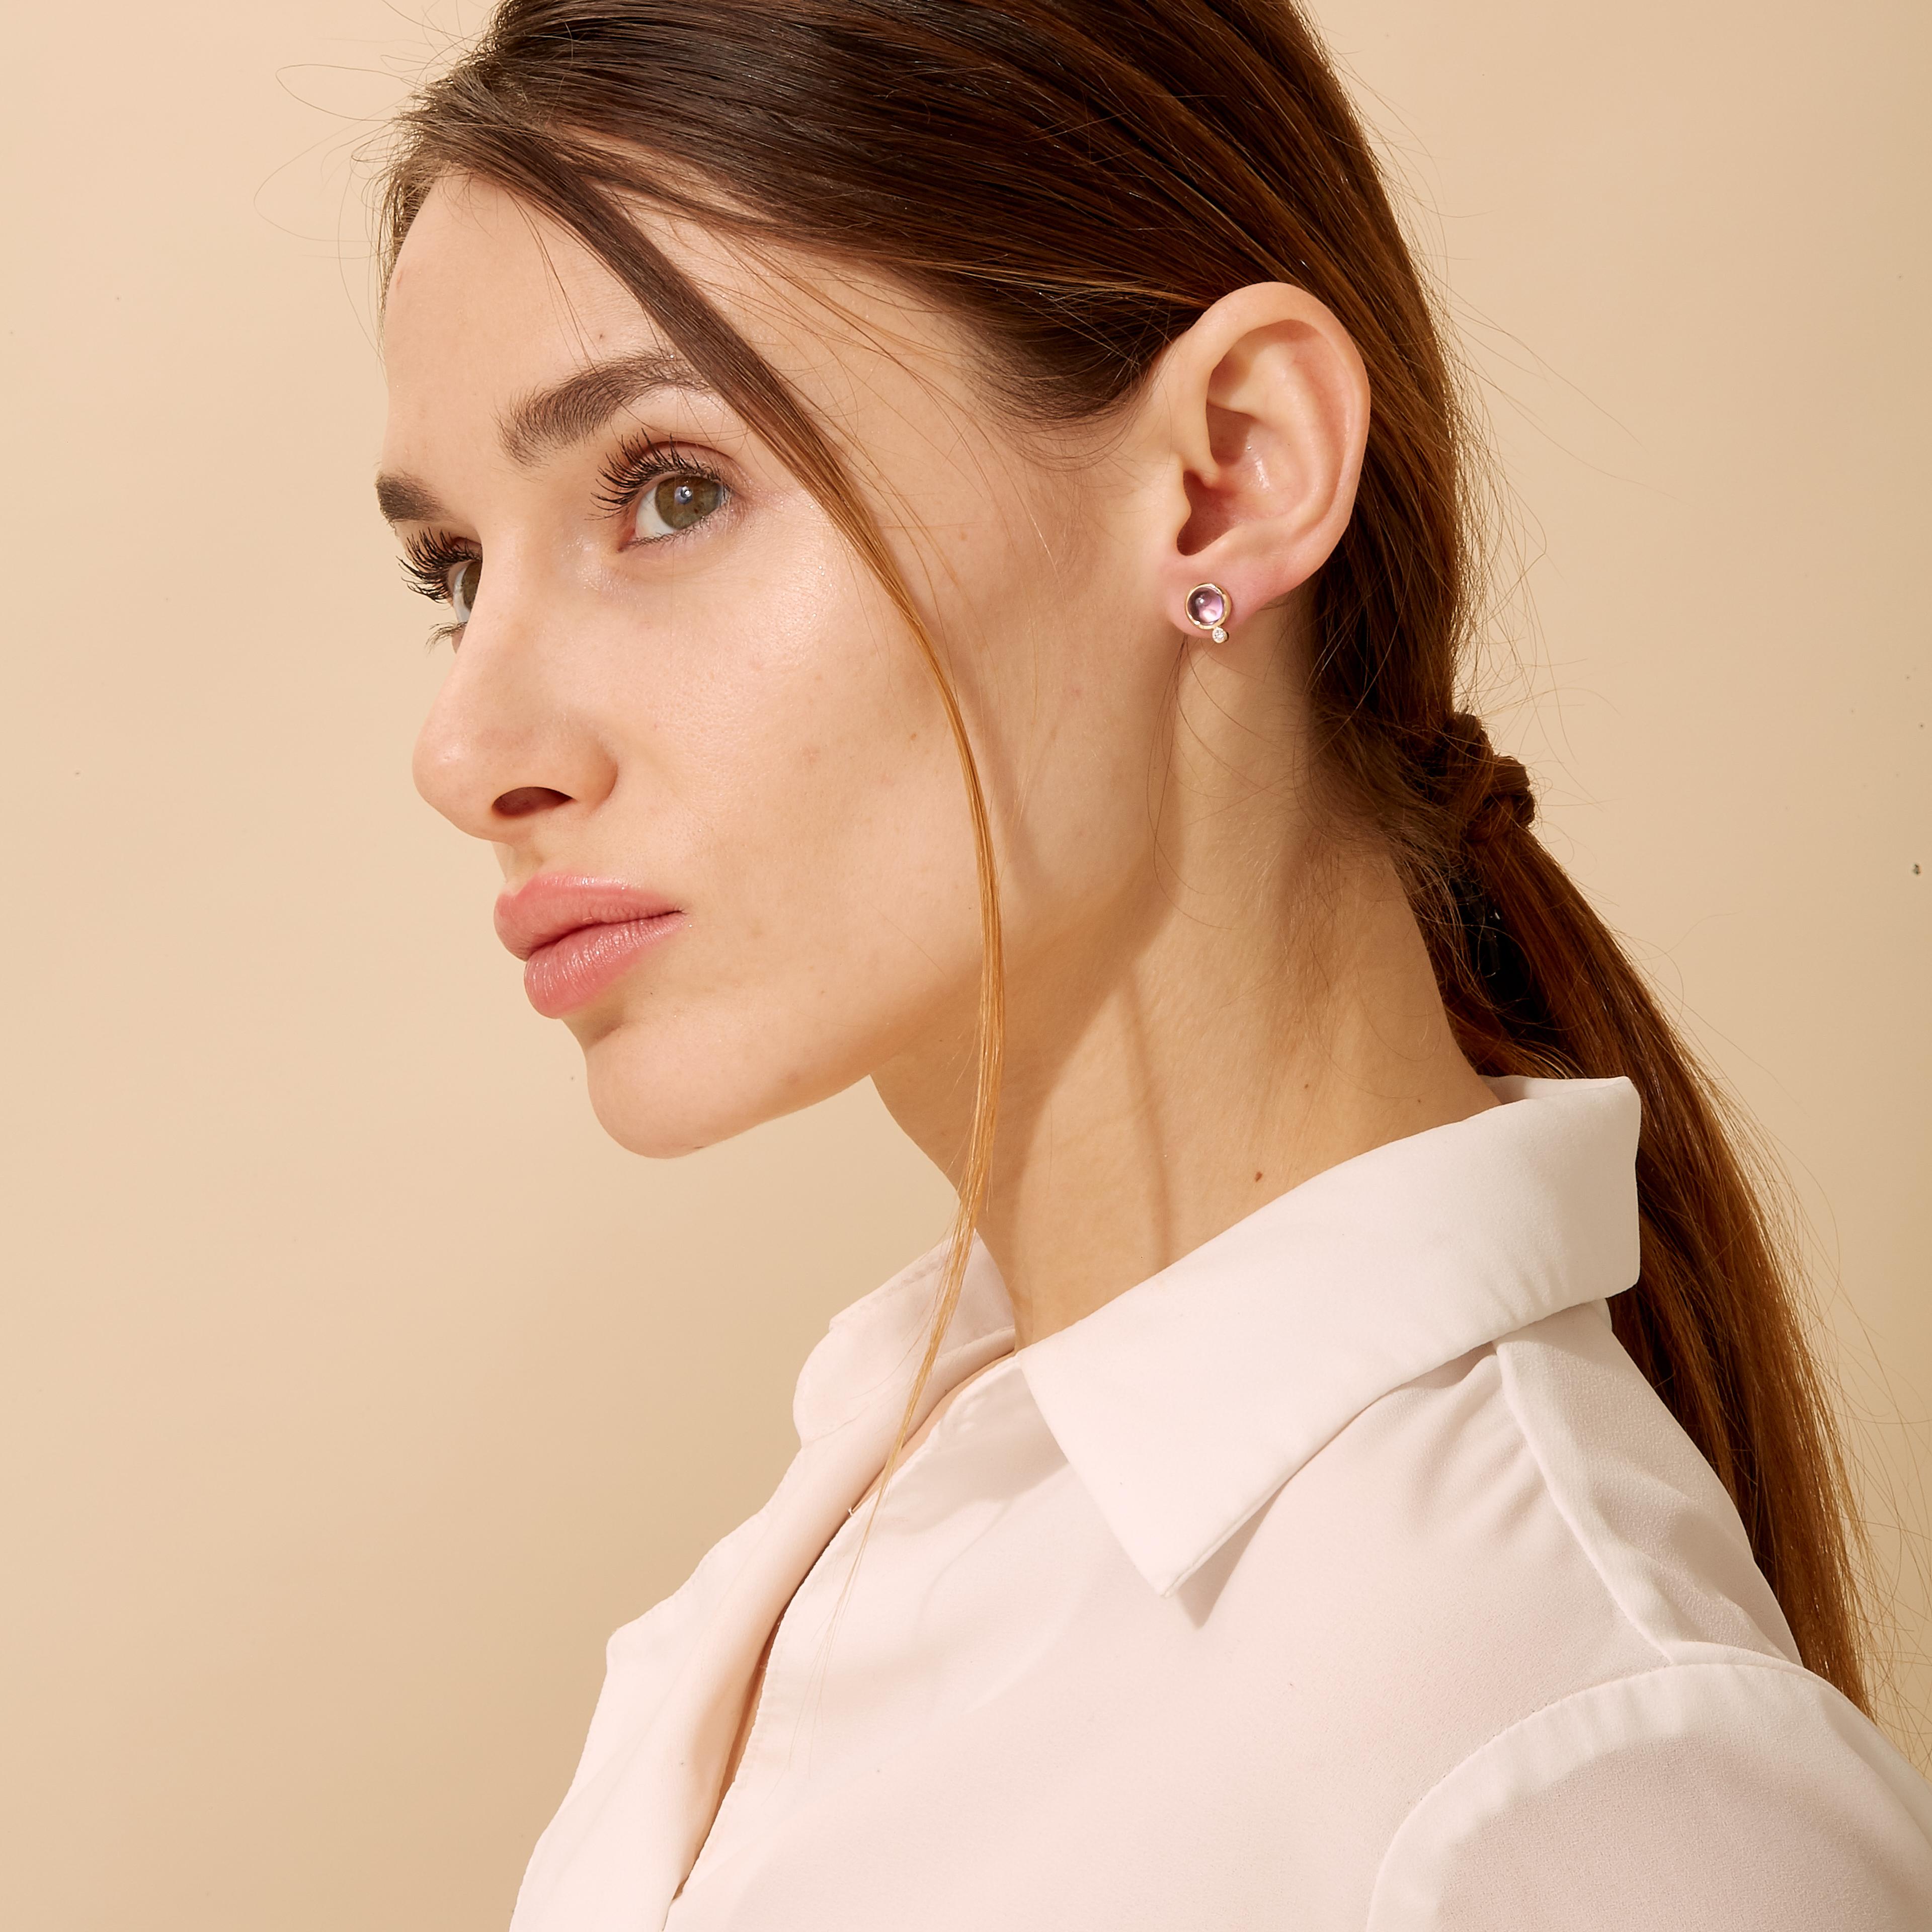 Created in 18 karat yellow gold
Amethyst 2 carats approx.
Diamonds 0.05 carat approx.
Post backs for pierced ears
Limited edition

Handcrafted with 18 karat yellow gold, these limited-edition earrings boast a glamorous amethyst centerpiece weighing